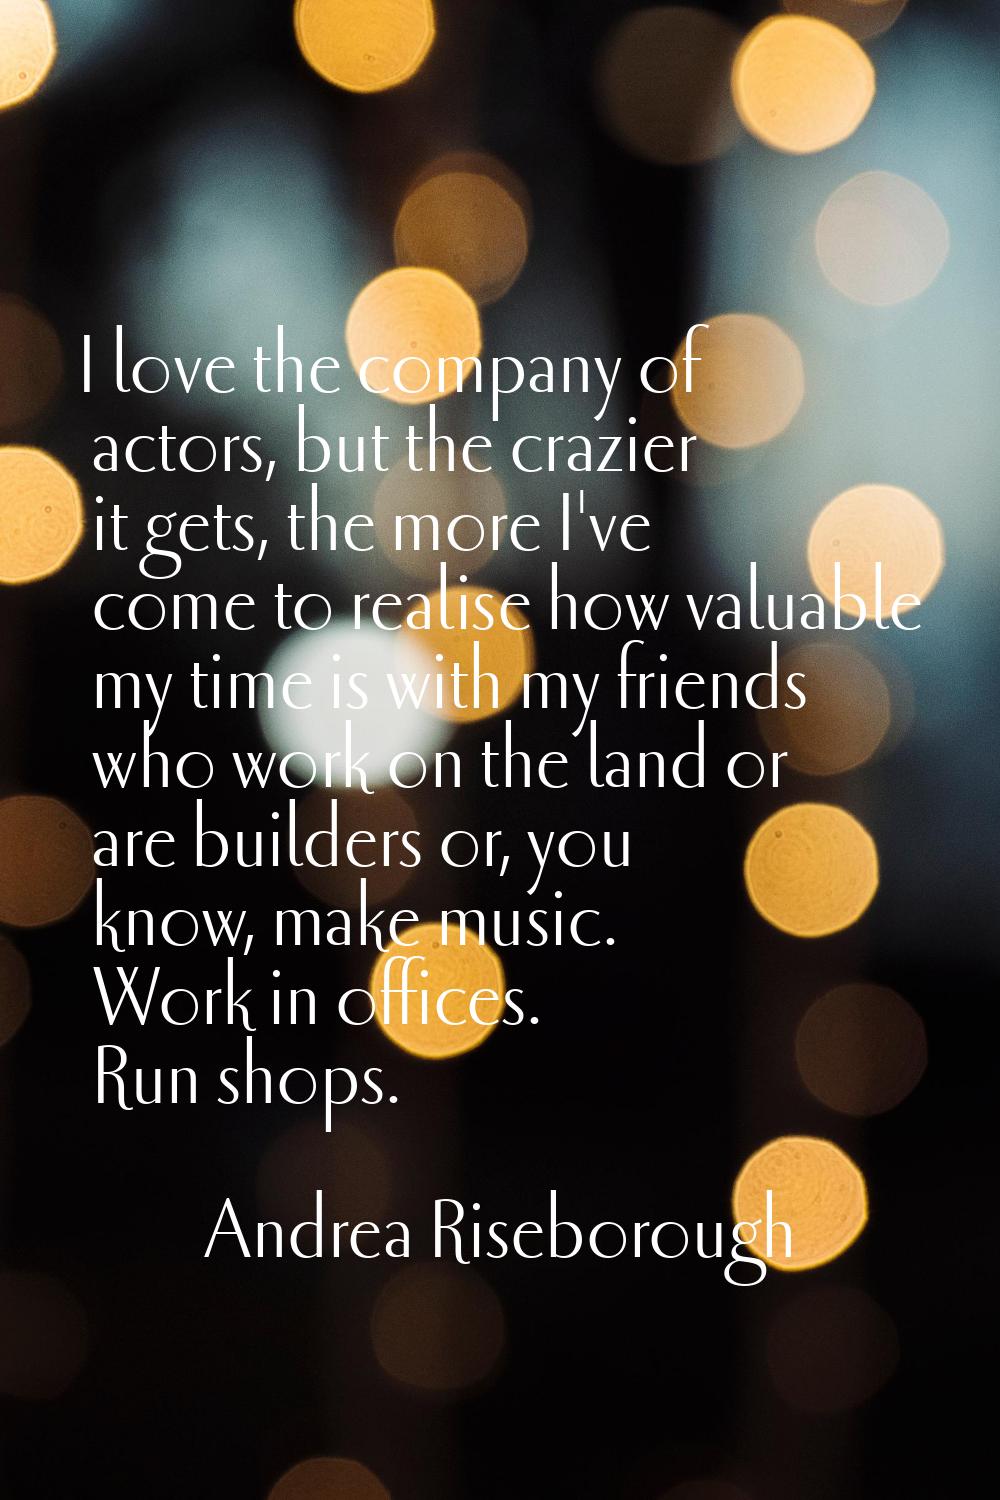 I love the company of actors, but the crazier it gets, the more I've come to realise how valuable m